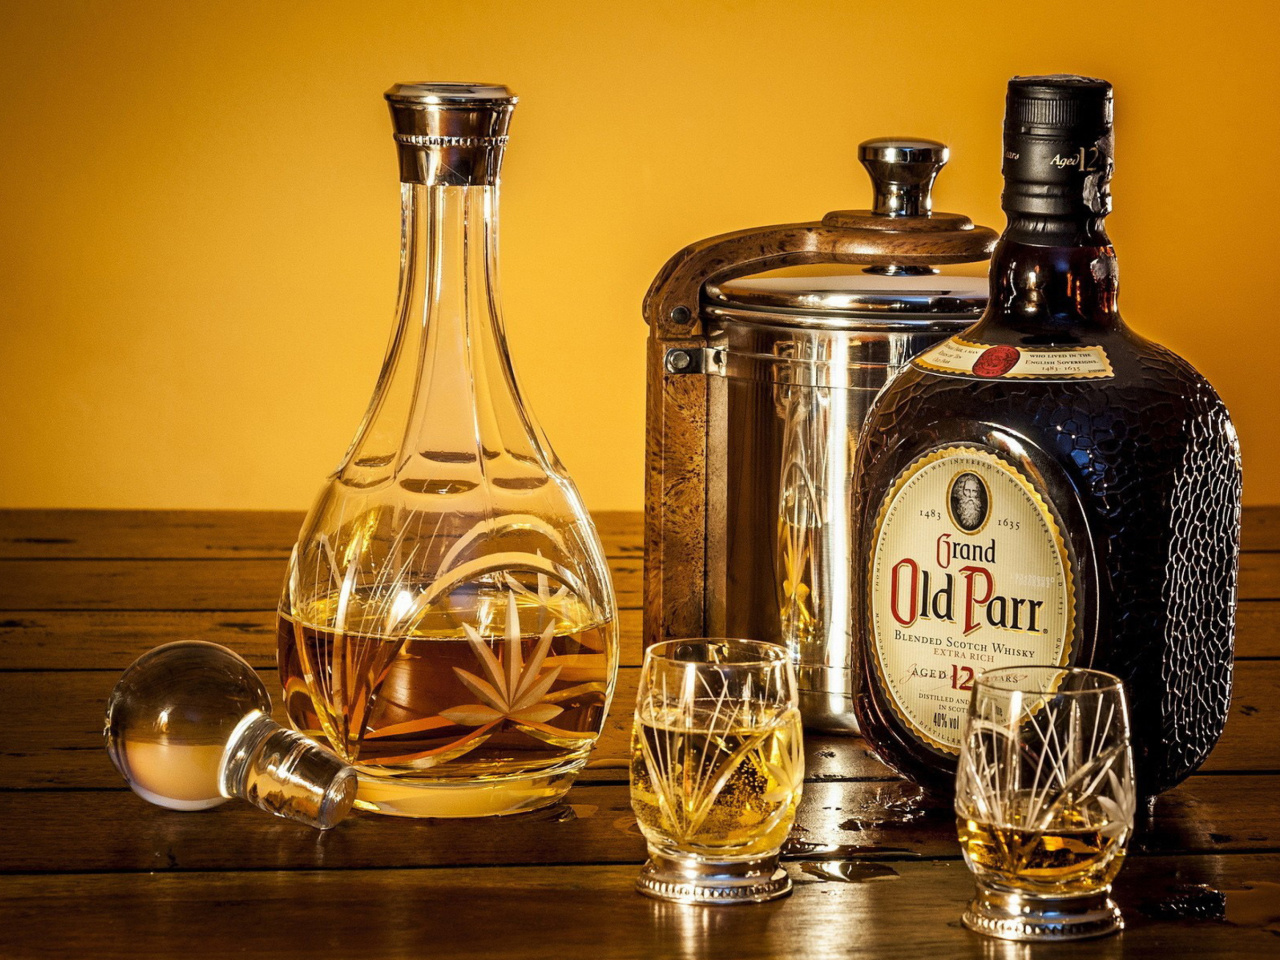 Grand Old Parr Blended Scotch Whisky screenshot #1 1280x960